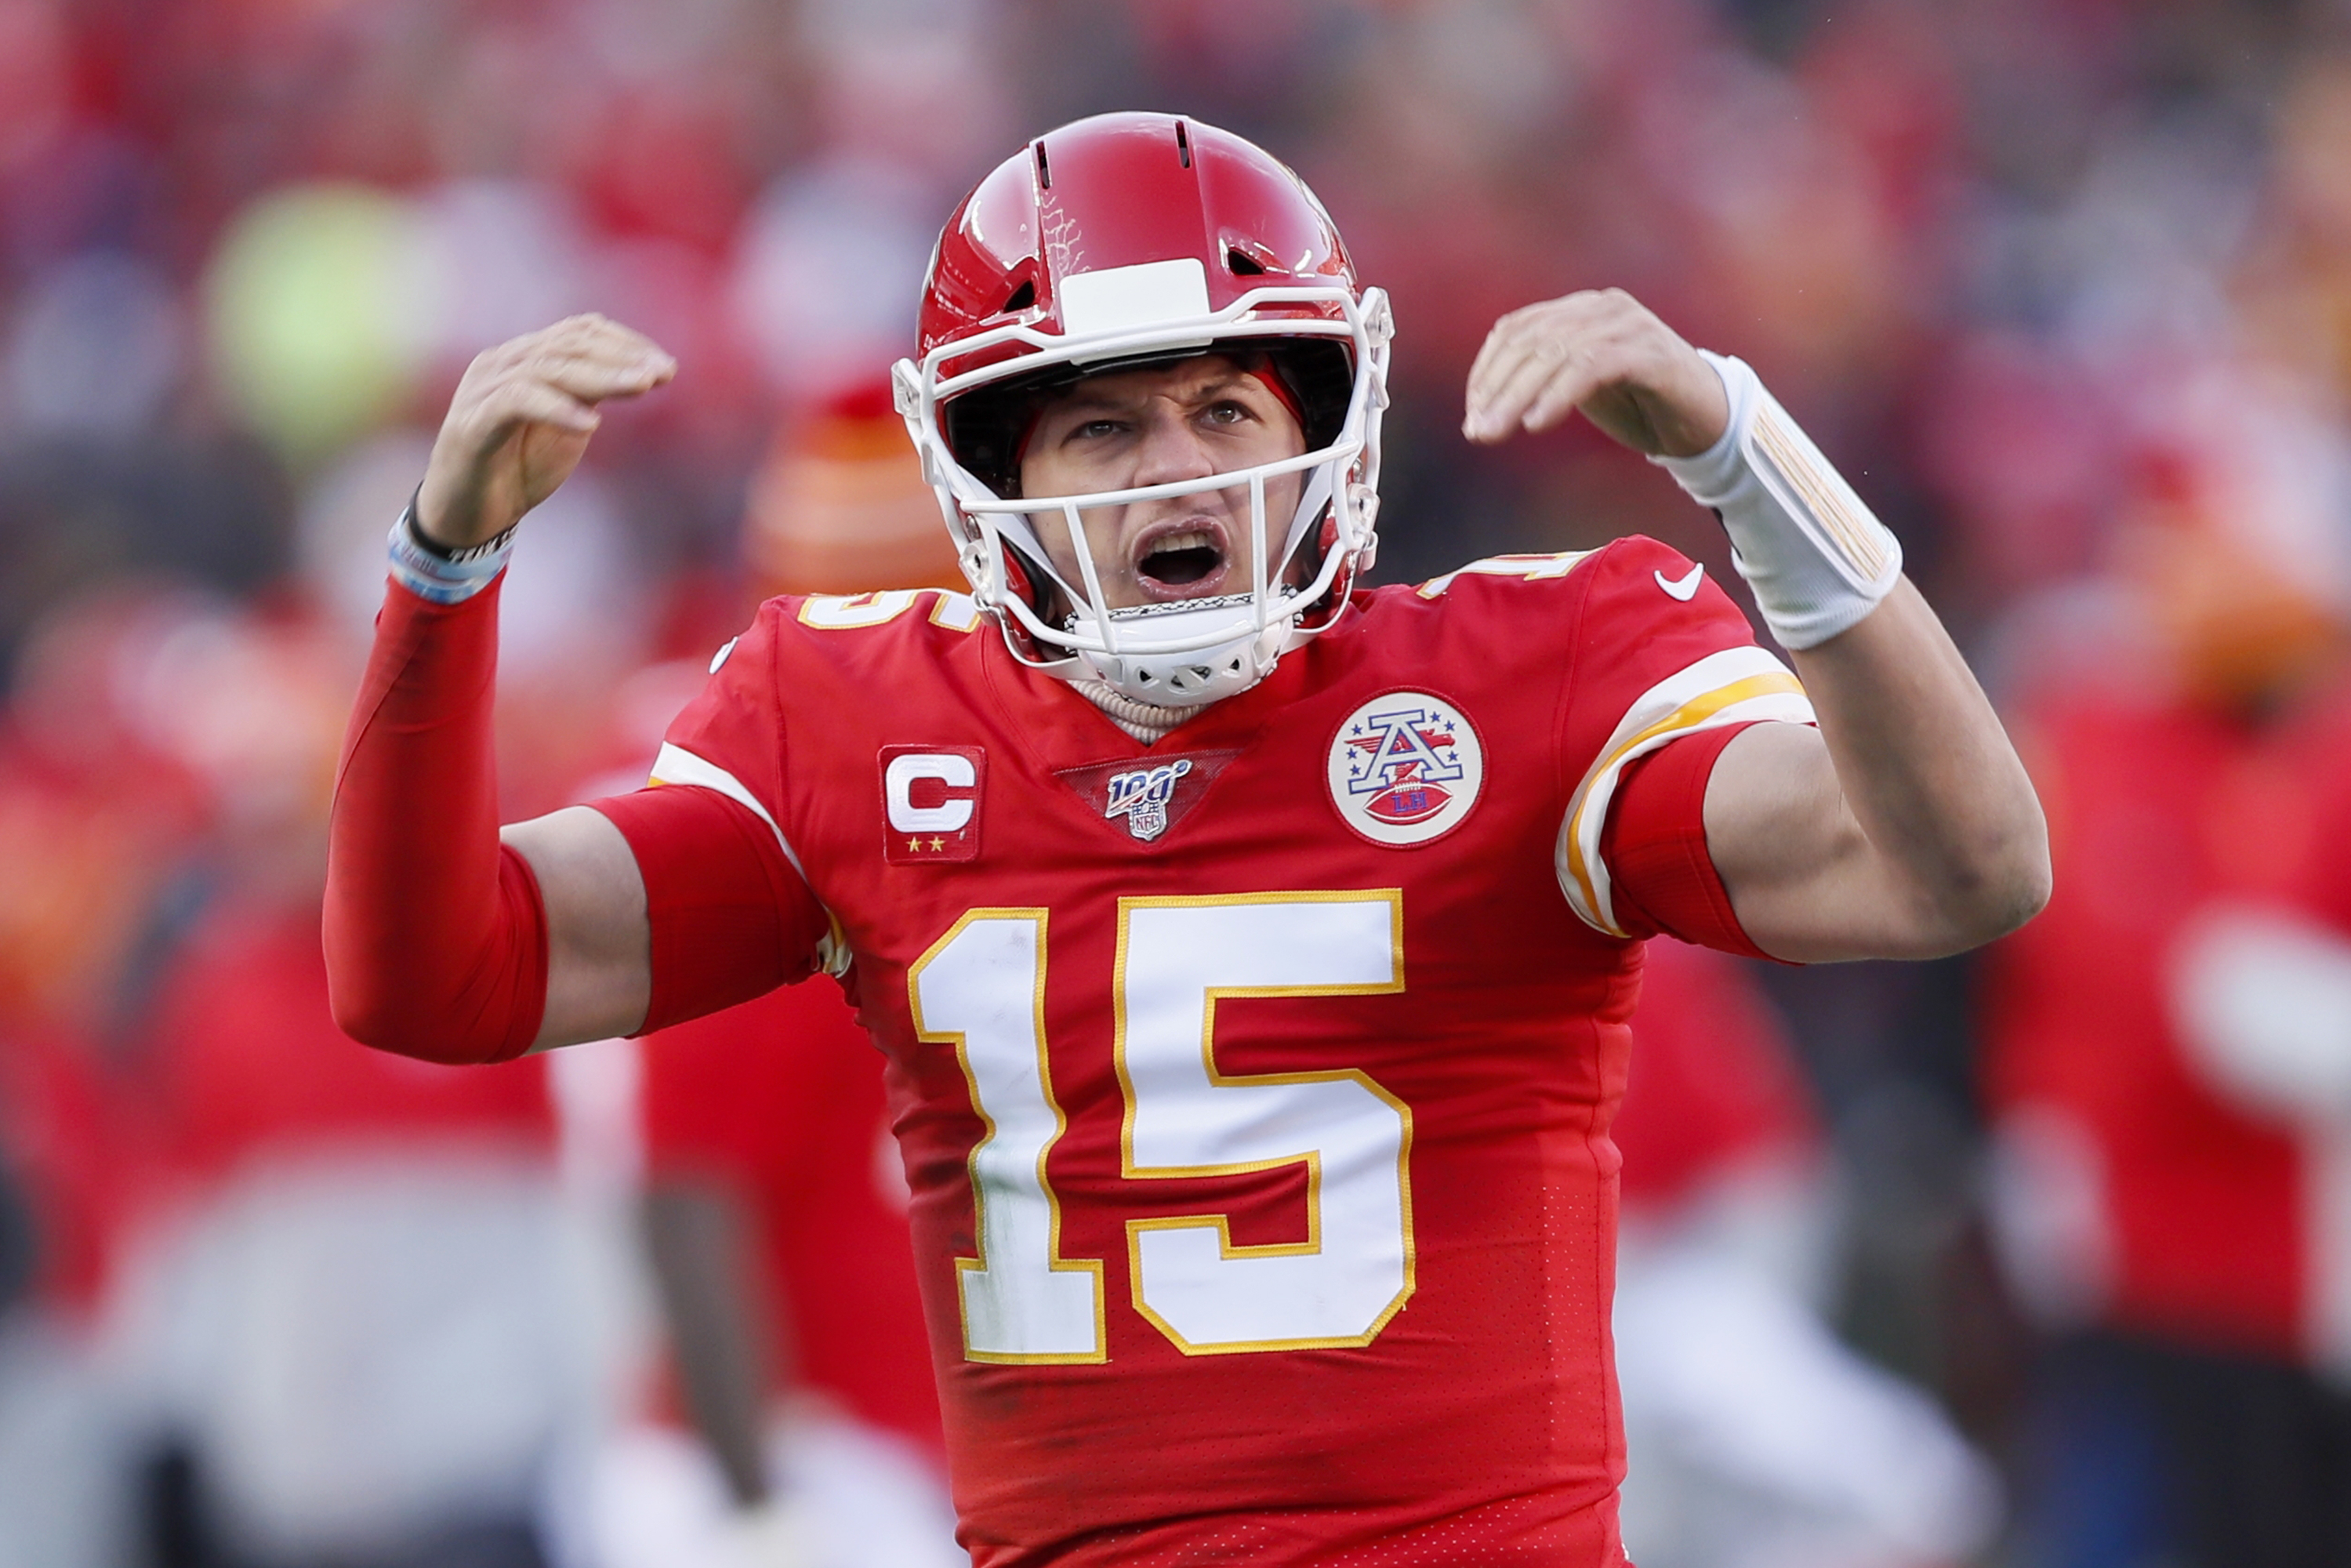 Patrick Mahomes, Stats, Contract, & Wife